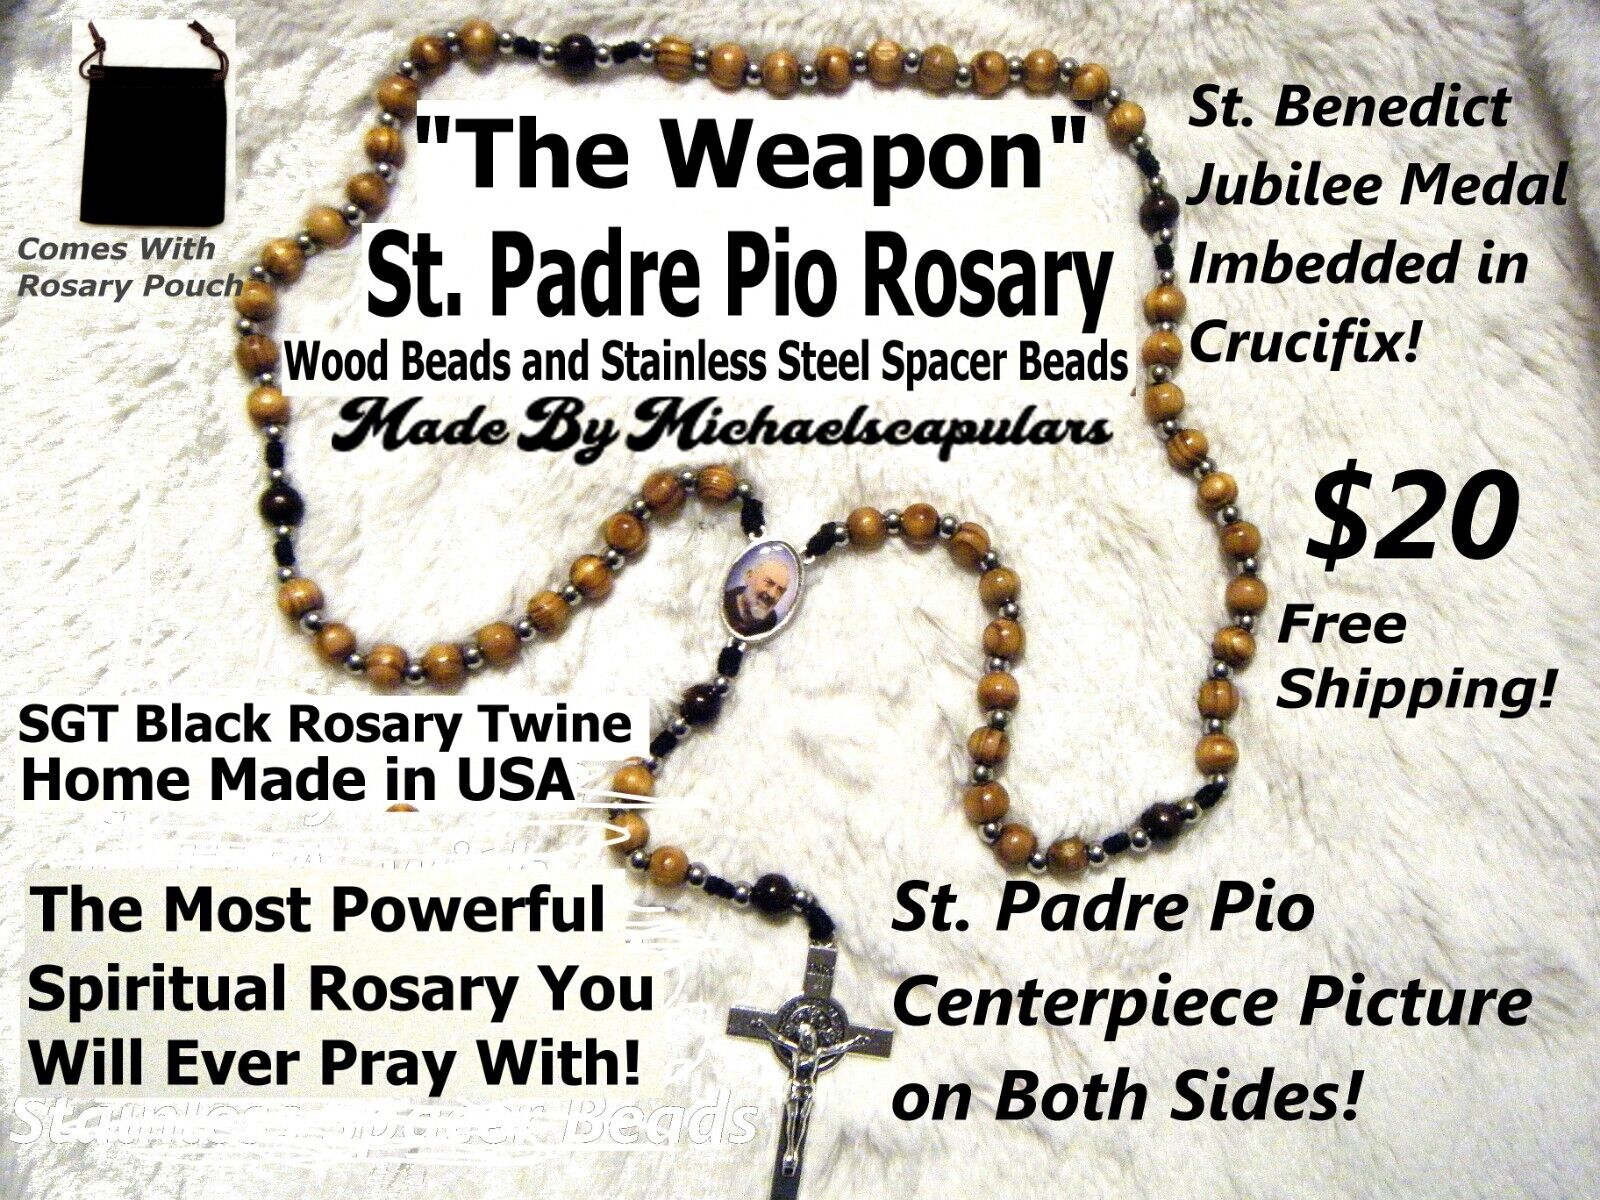 ST PADRE PIO ROSARY (THE WEAPON) Handmade in The USA